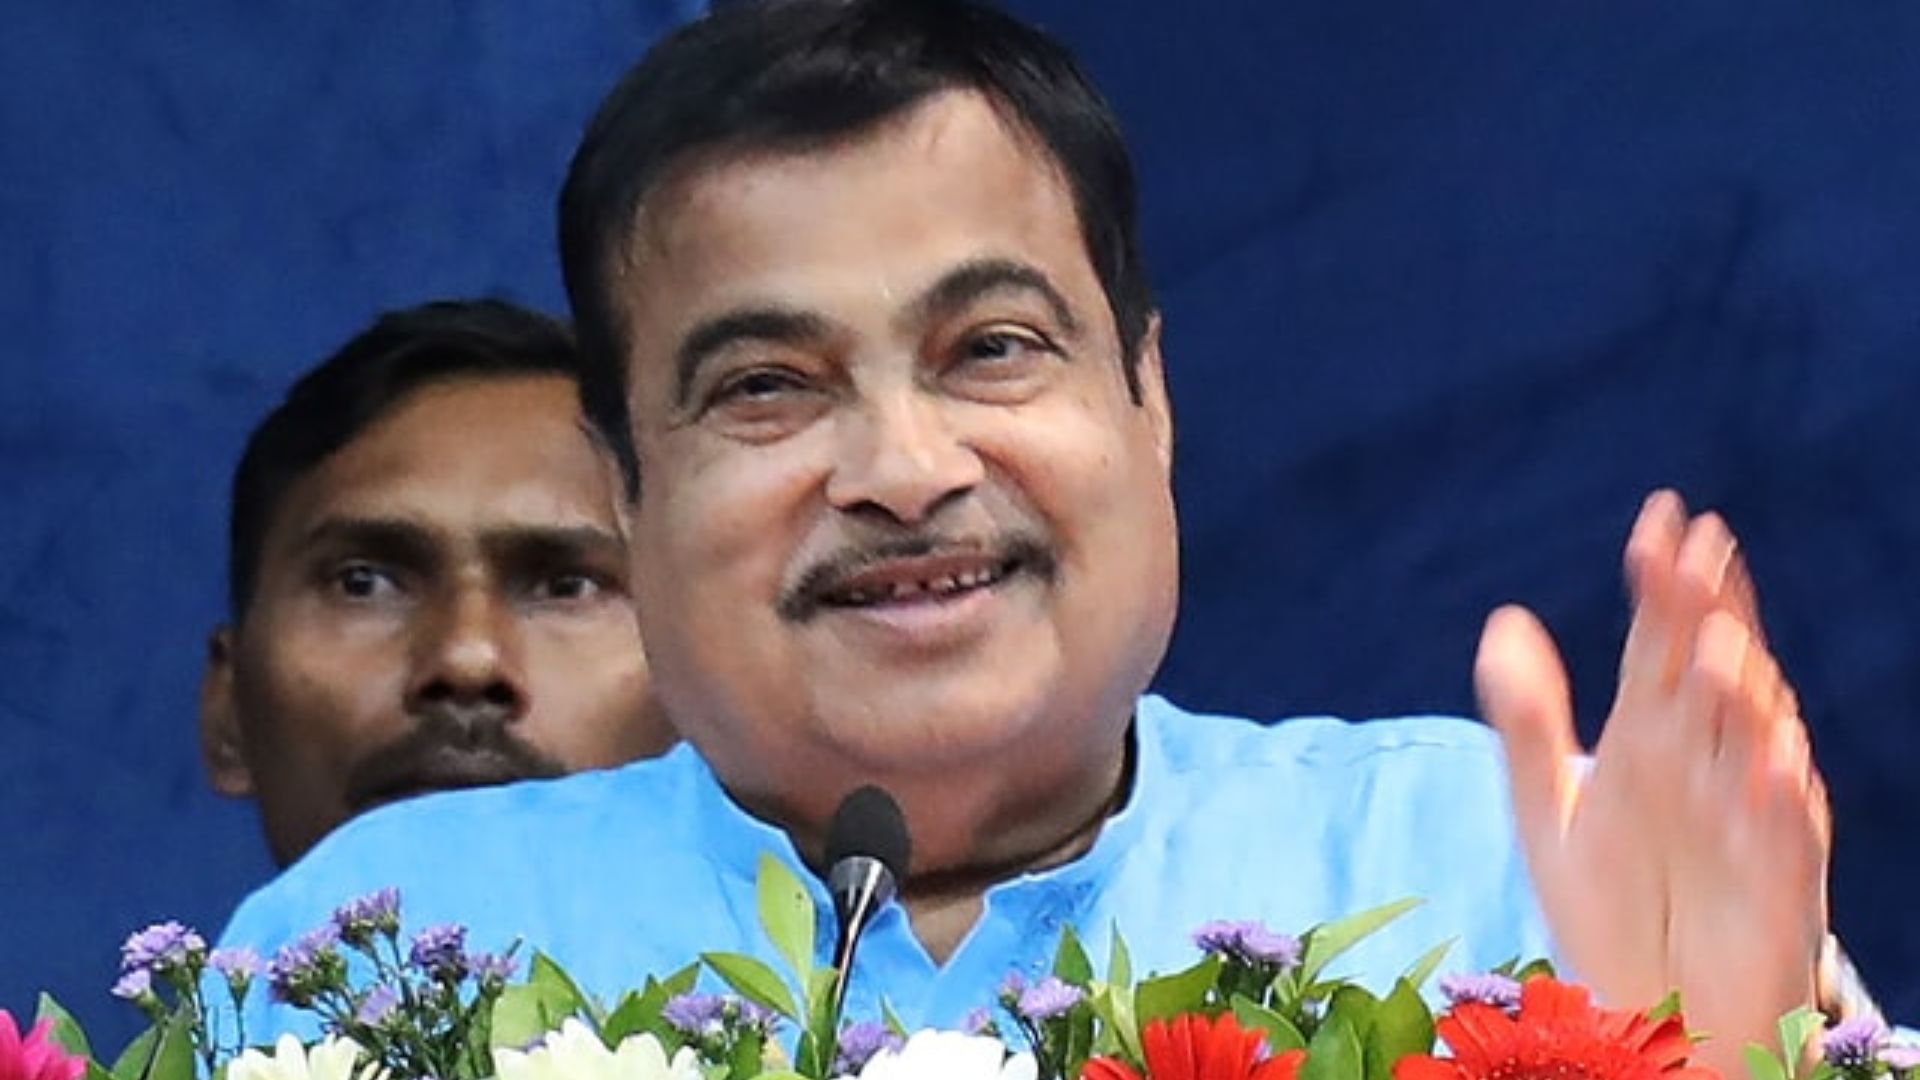 101 pc sure of my victory: Nitin Gadkari on winning election from Nagpur